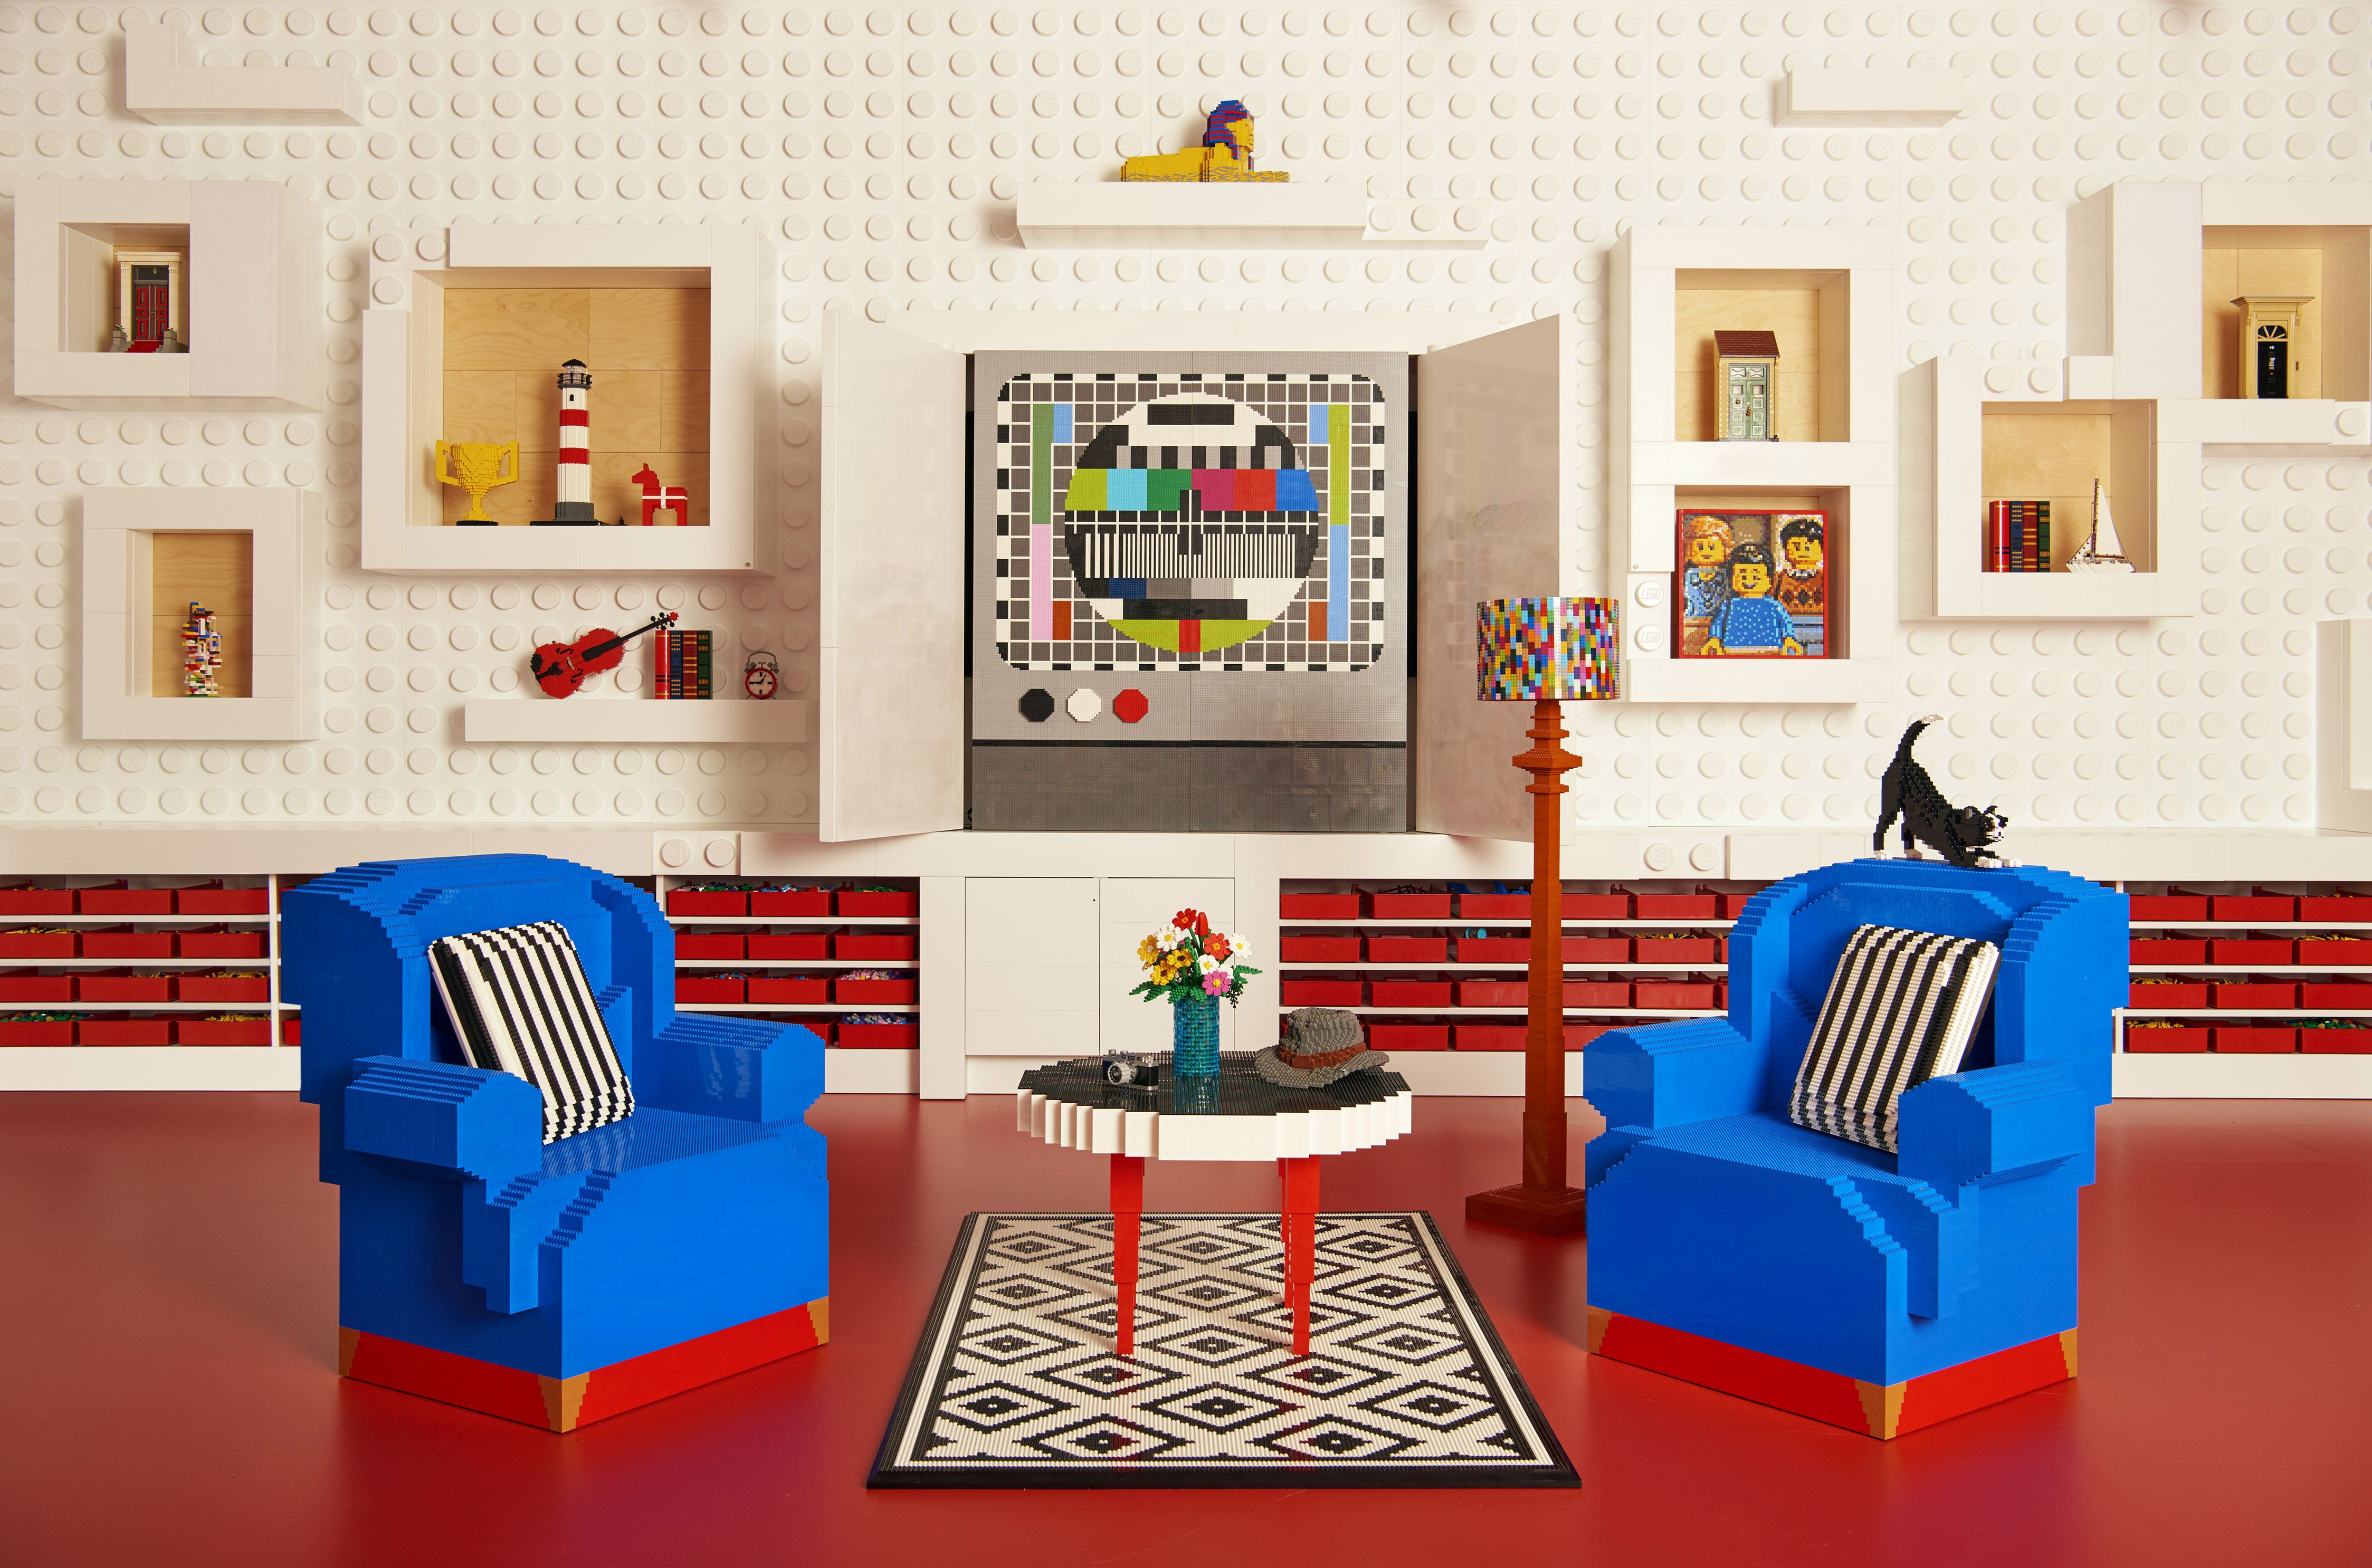 Lego House Win A Stay In This Airbnb Property Made Out Of Lego Bricks